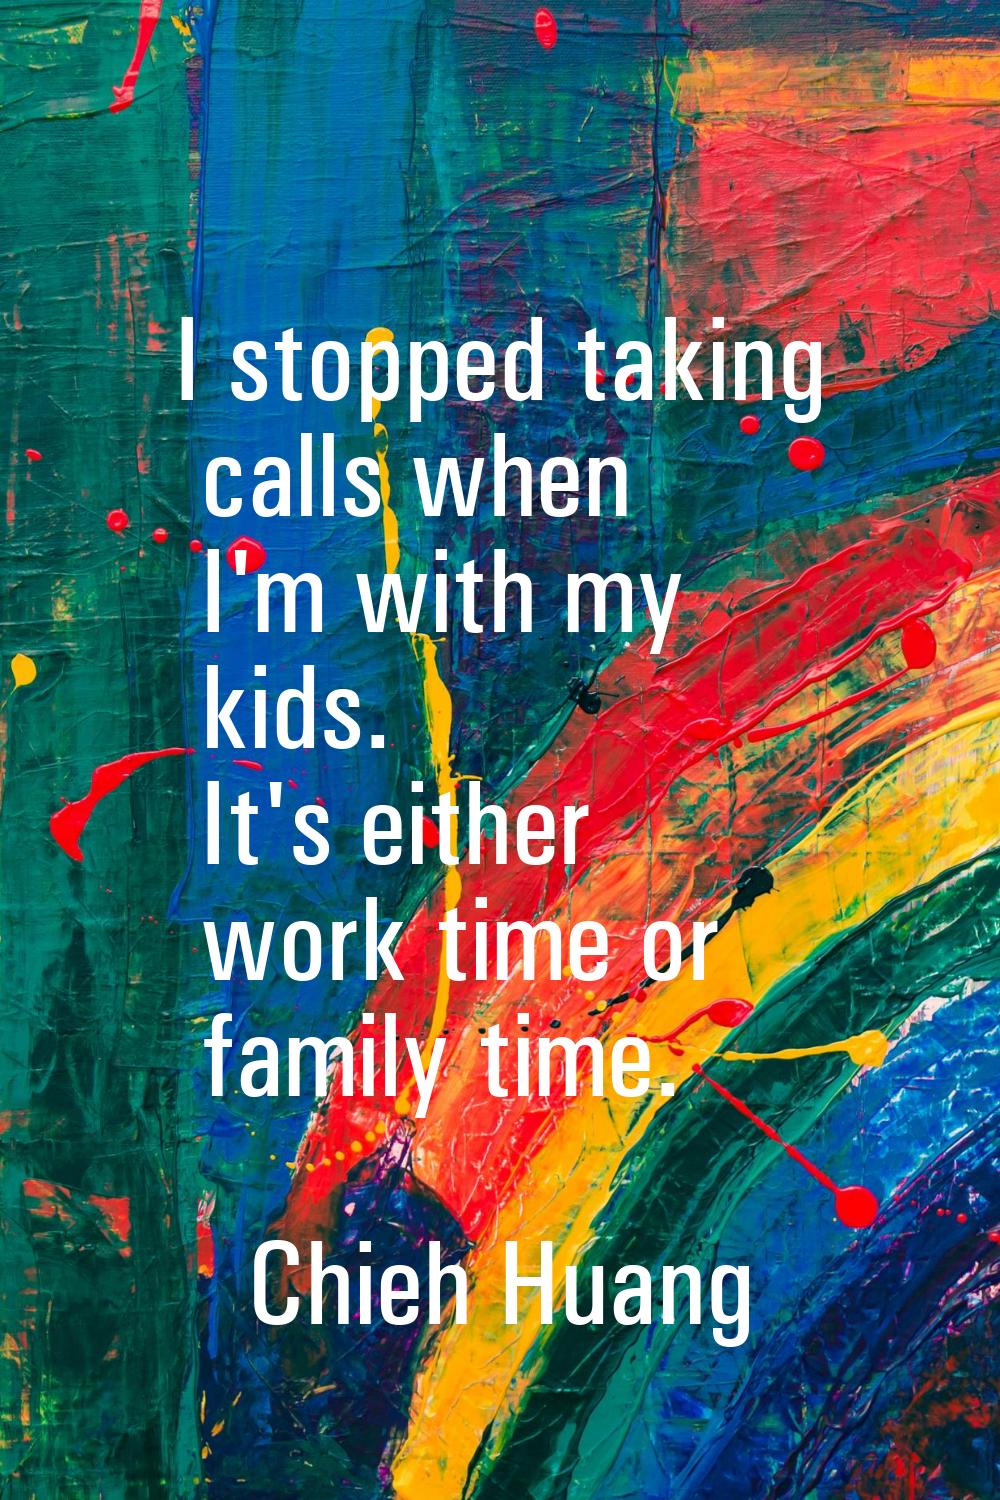 I stopped taking calls when I'm with my kids. It's either work time or family time.